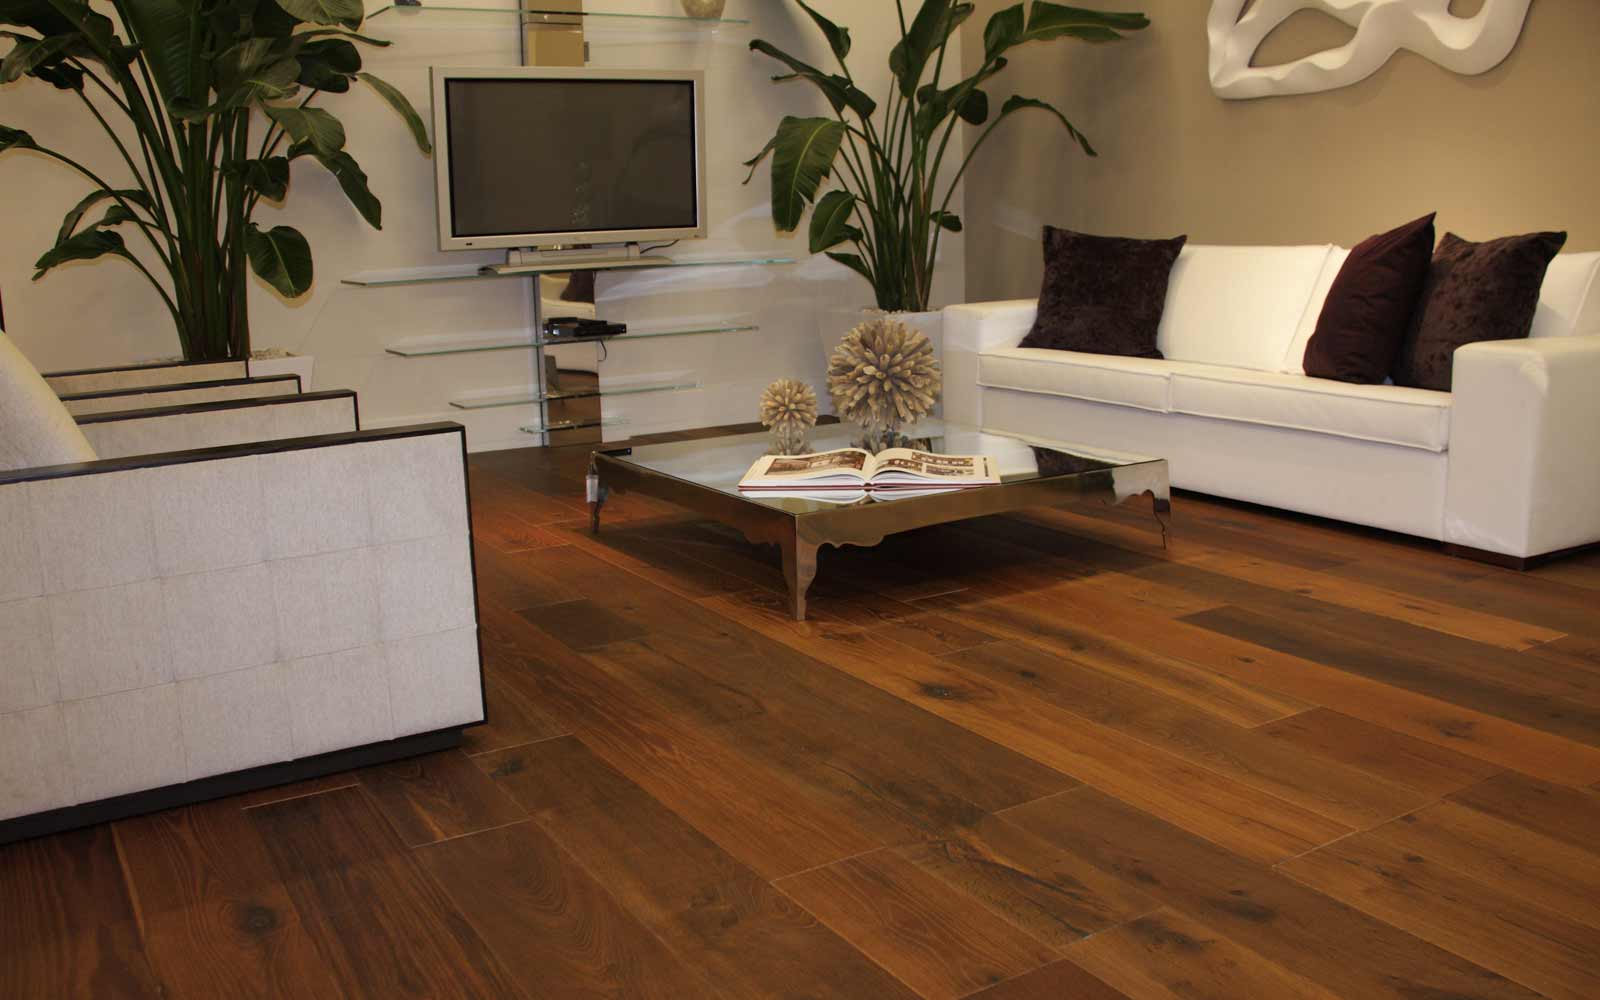 Flooring Trends – Where Do You Stand?